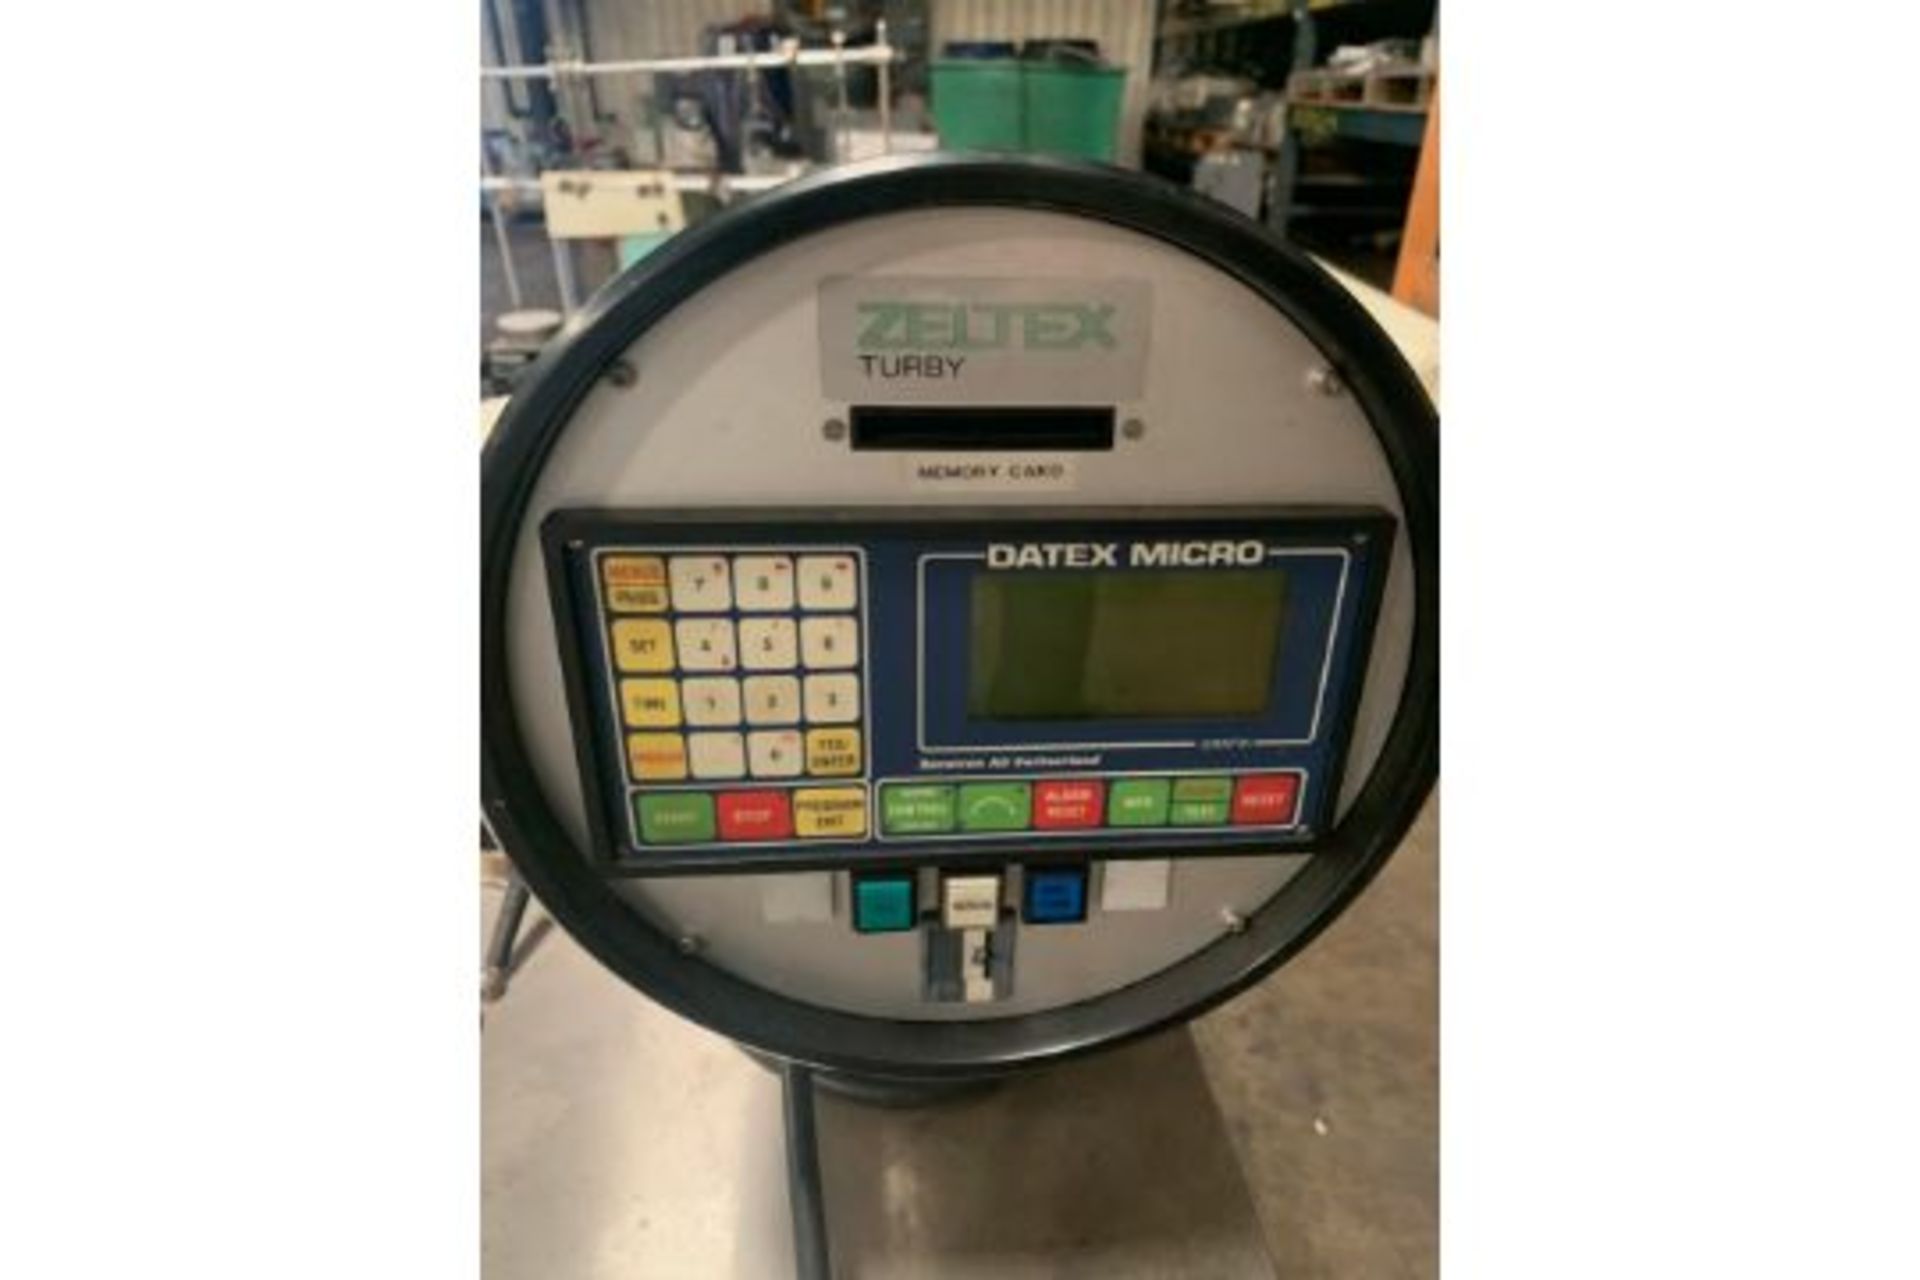 MATHIS ZELTEX TURBY for Sample Dyeing Model T6 35 serial T020.95. 220 Volts, Rigging Fee: $25 - Image 3 of 10